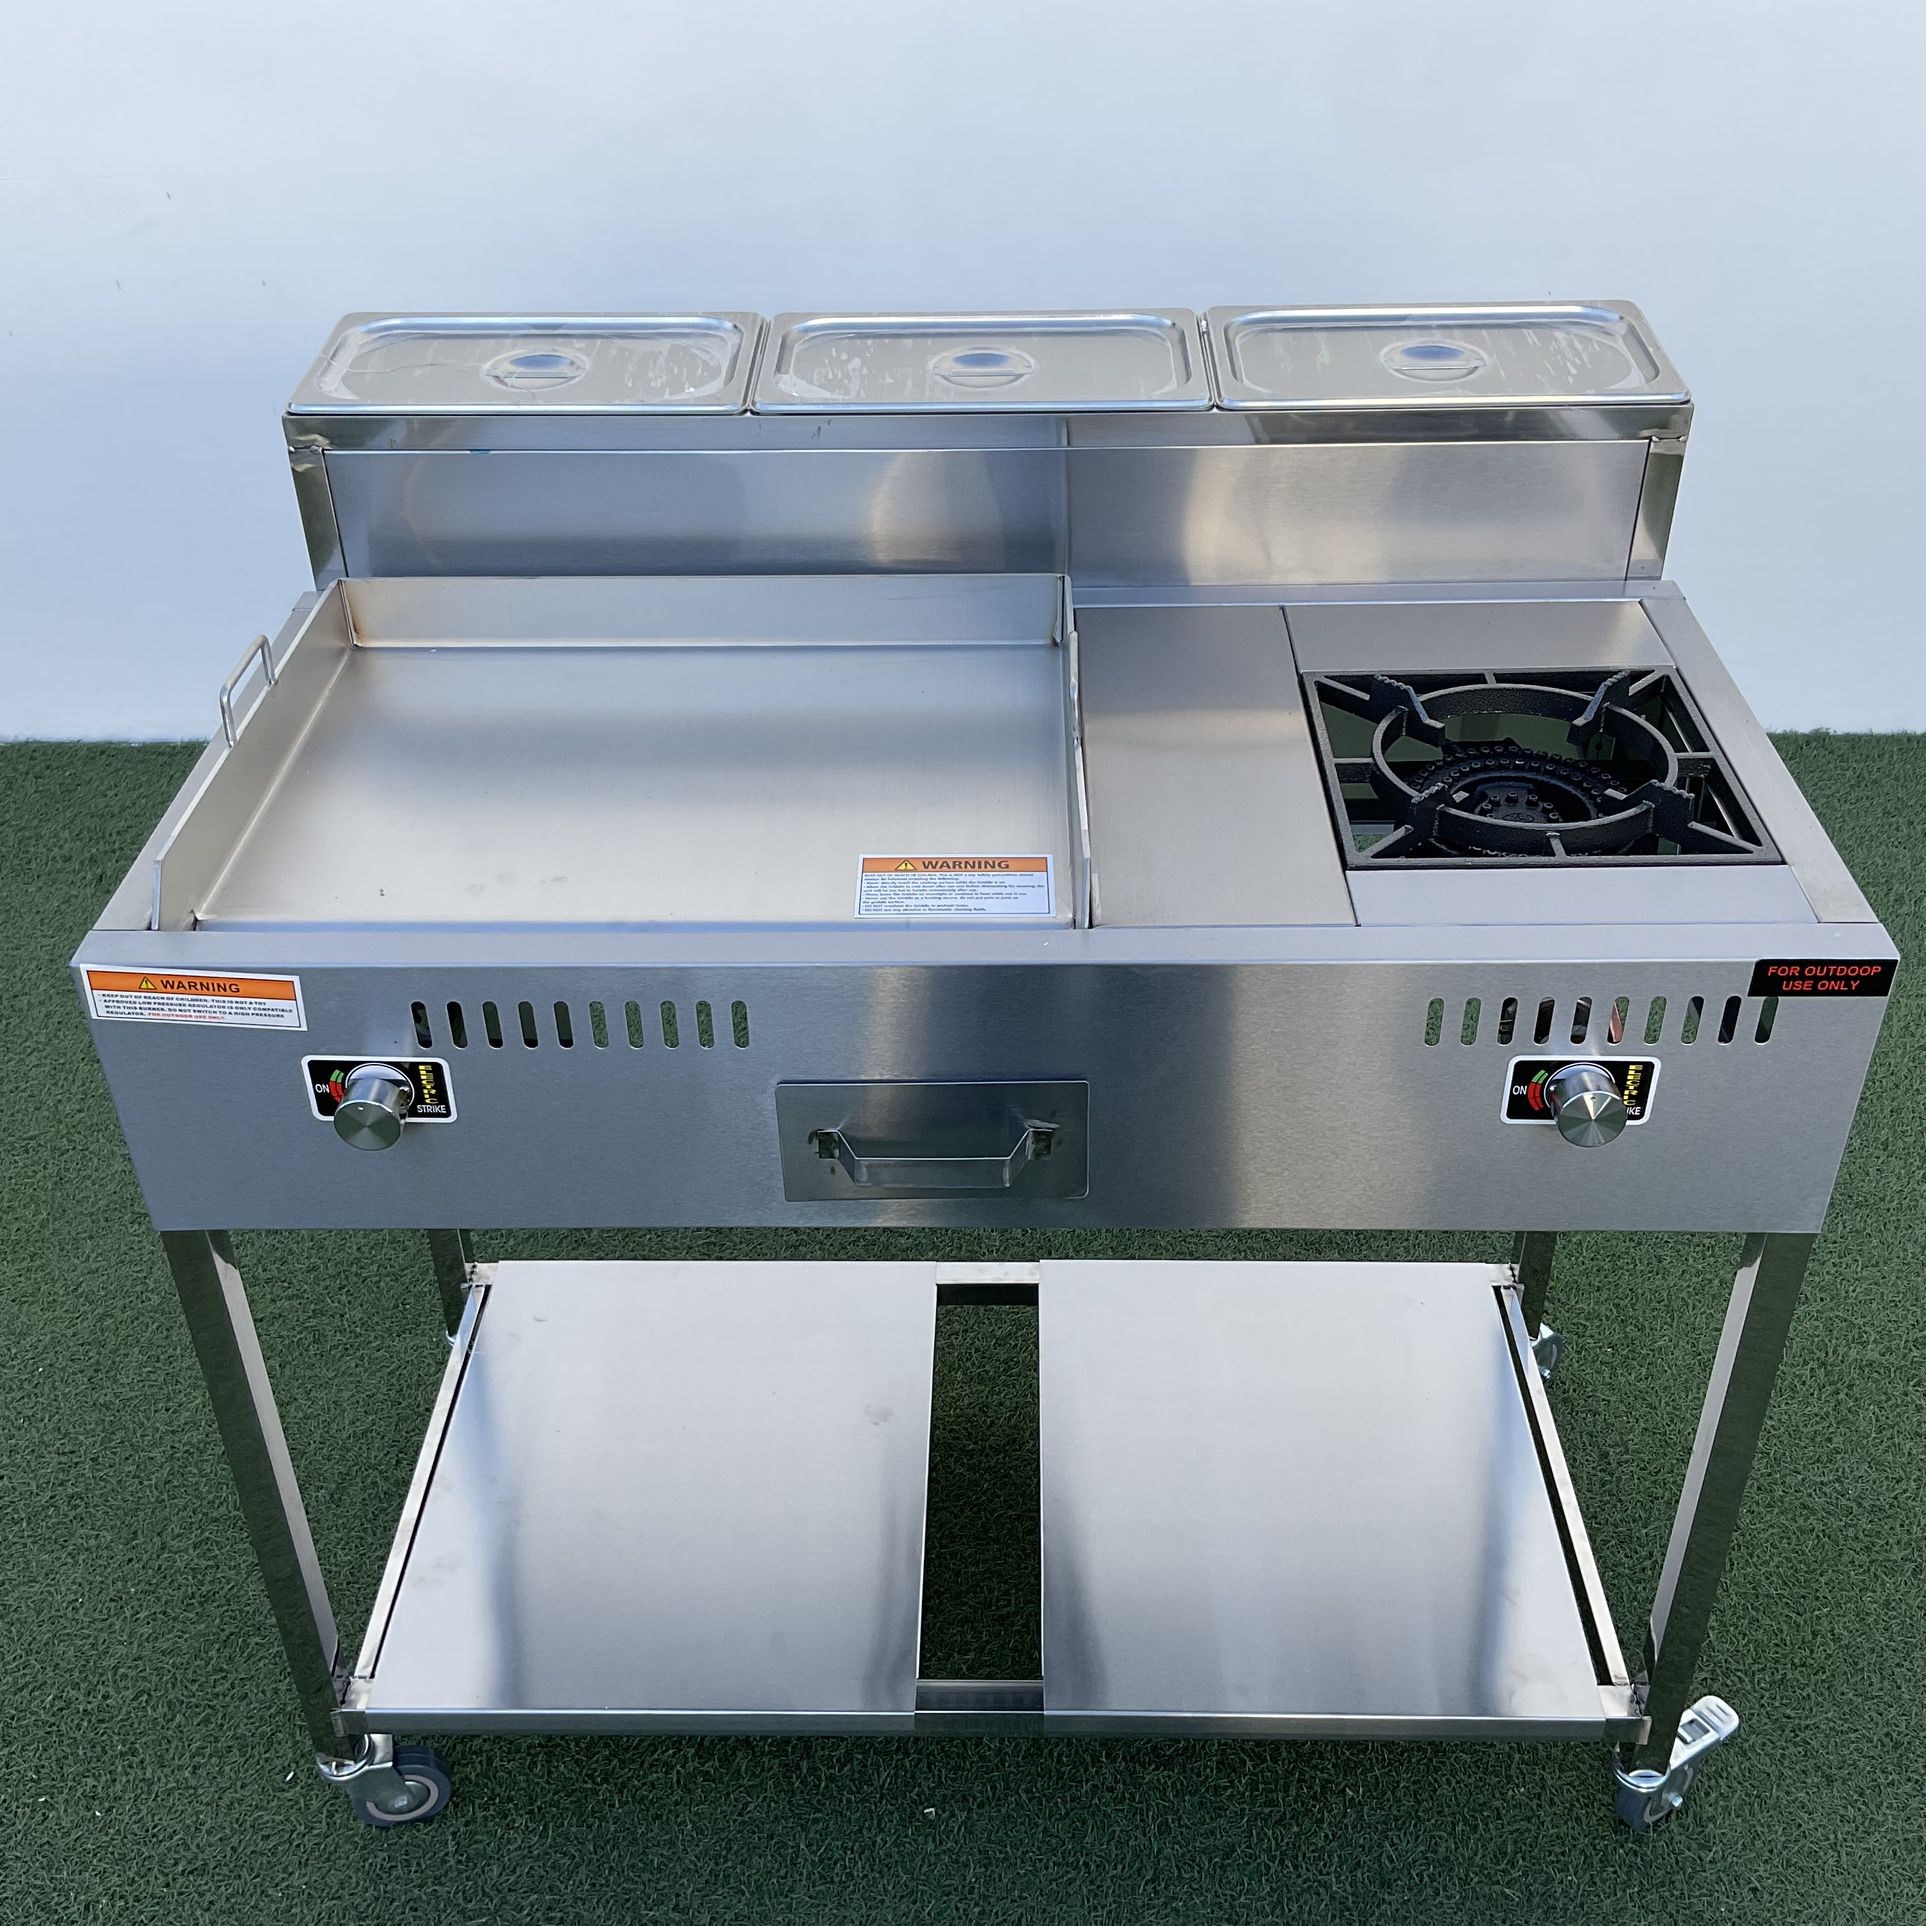 Taco Cart Catering Cart Includes 21x 16 Stainless Steel Griddle + Single Burner Stove Outdoor Propane Equipment Plancha Para Tacos Con Estufa 